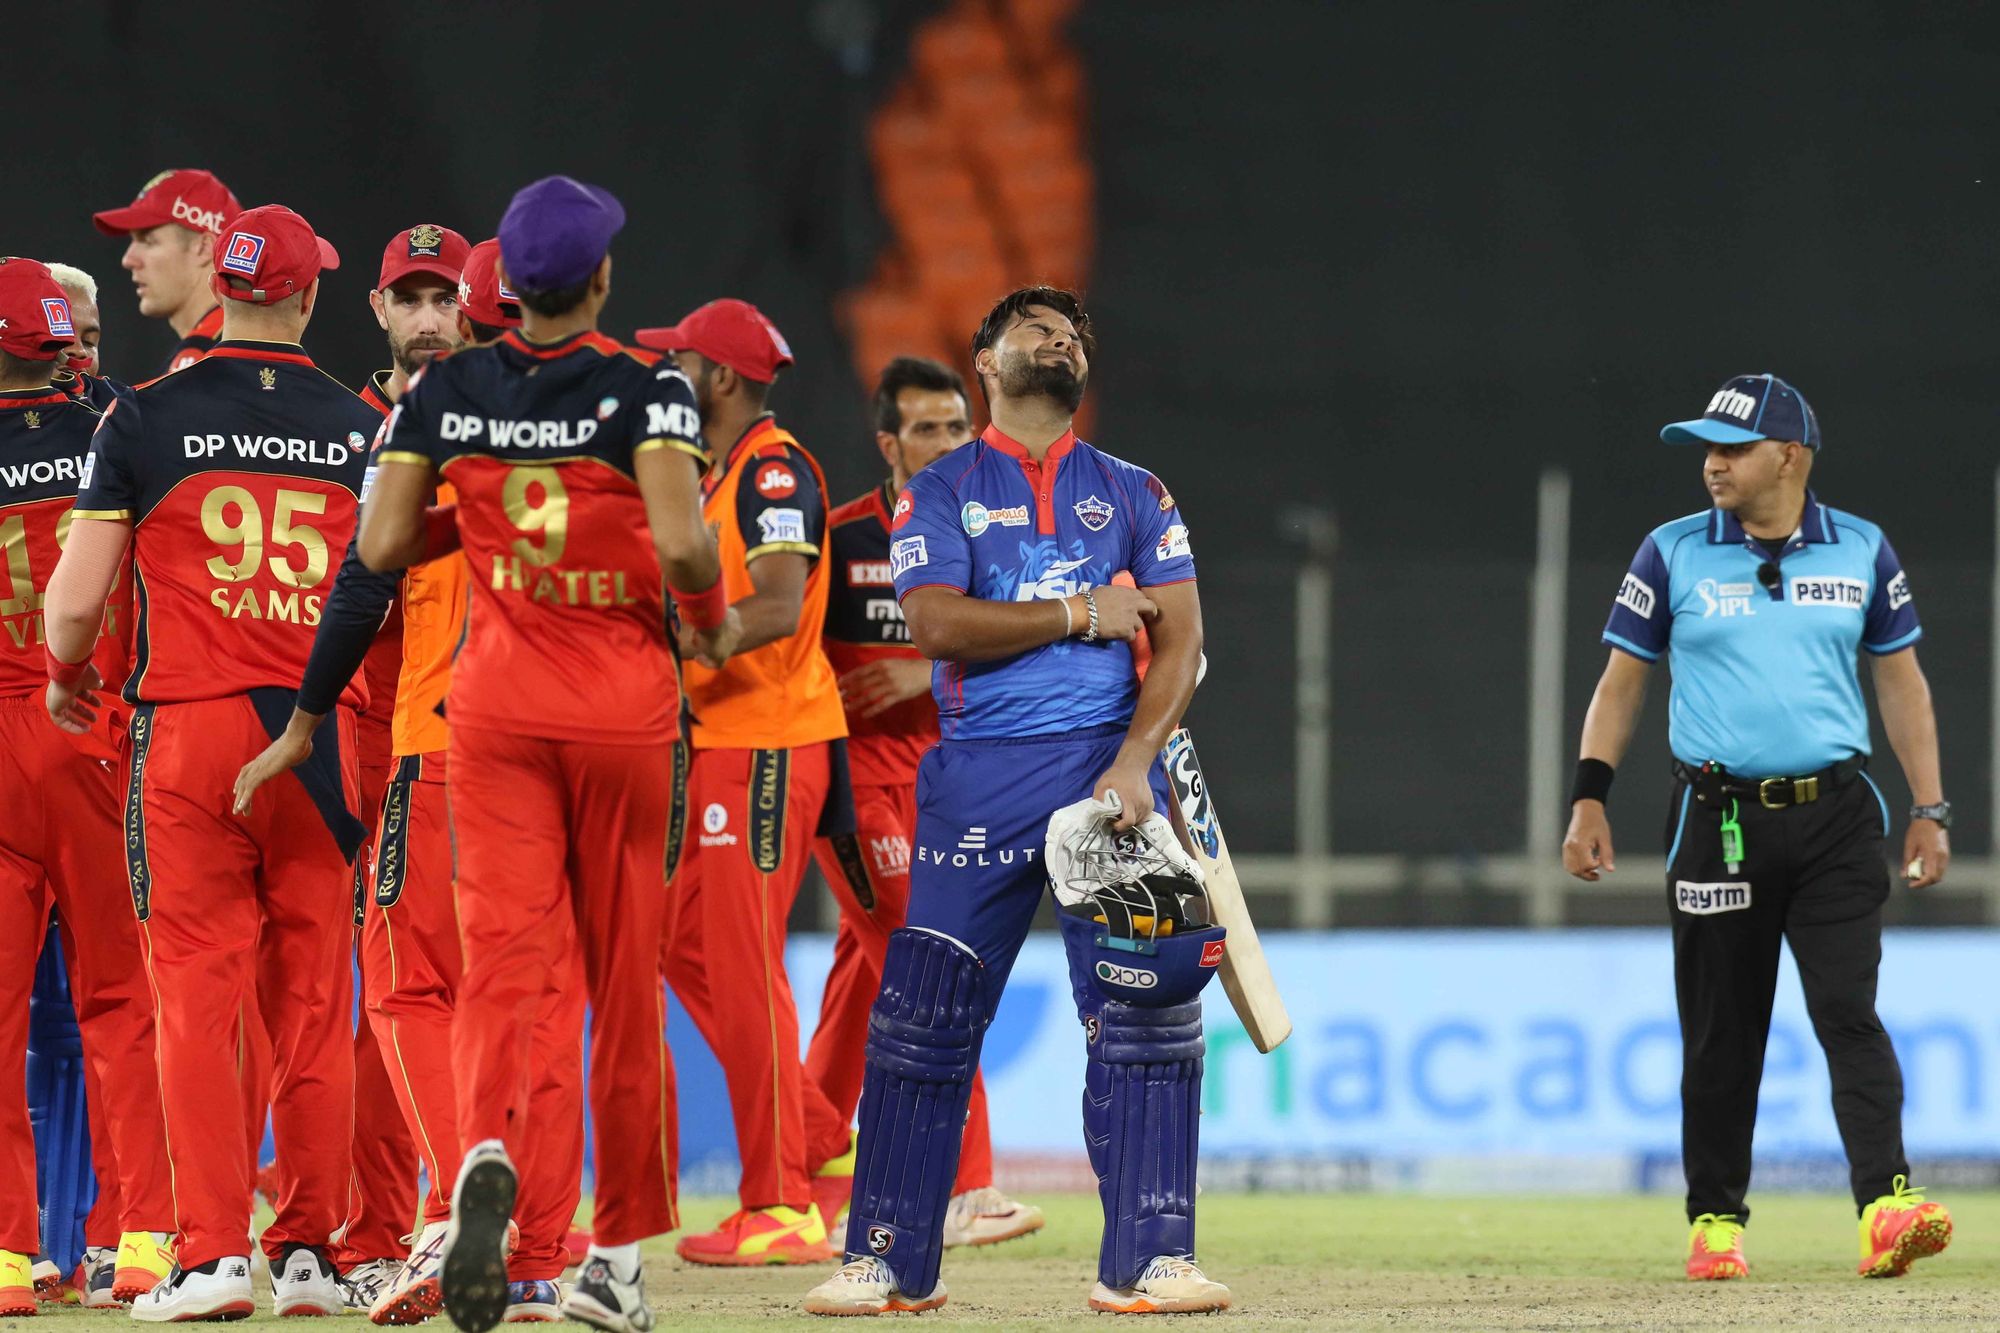 RCB defeated DC by just 1 run | BCCI/IPL